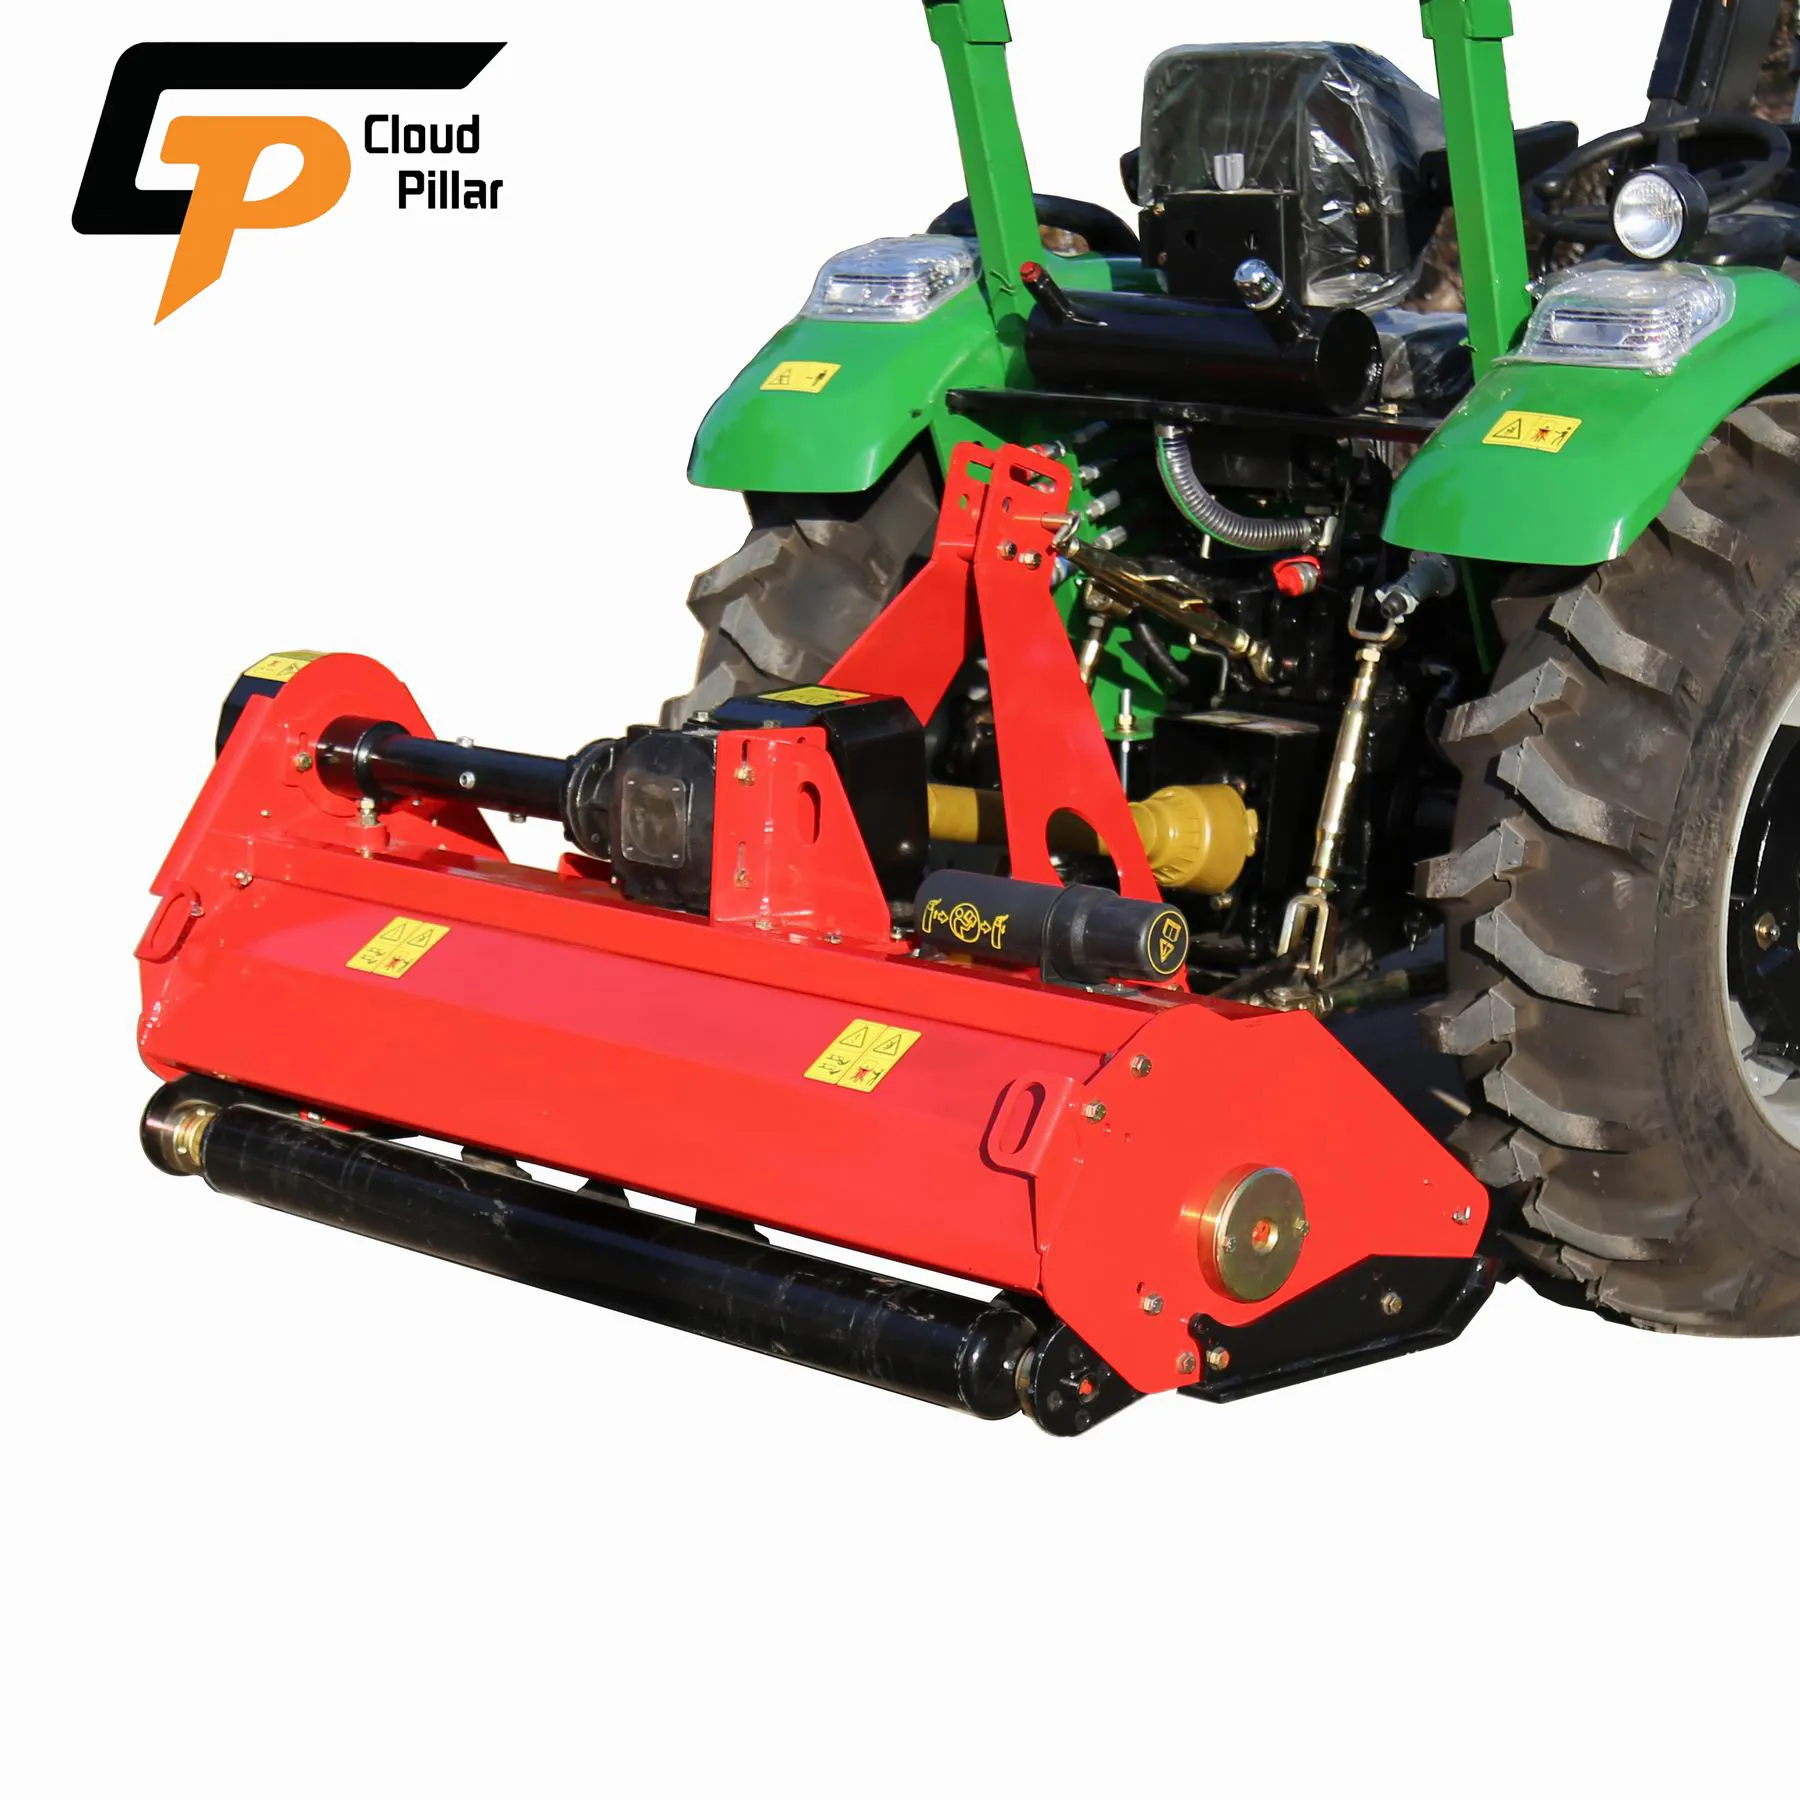 Factory CP Mower hydraulic heavy duty tow behind atv flail lawn 4x4 mower mulcher for tractor attachments with pto shaft